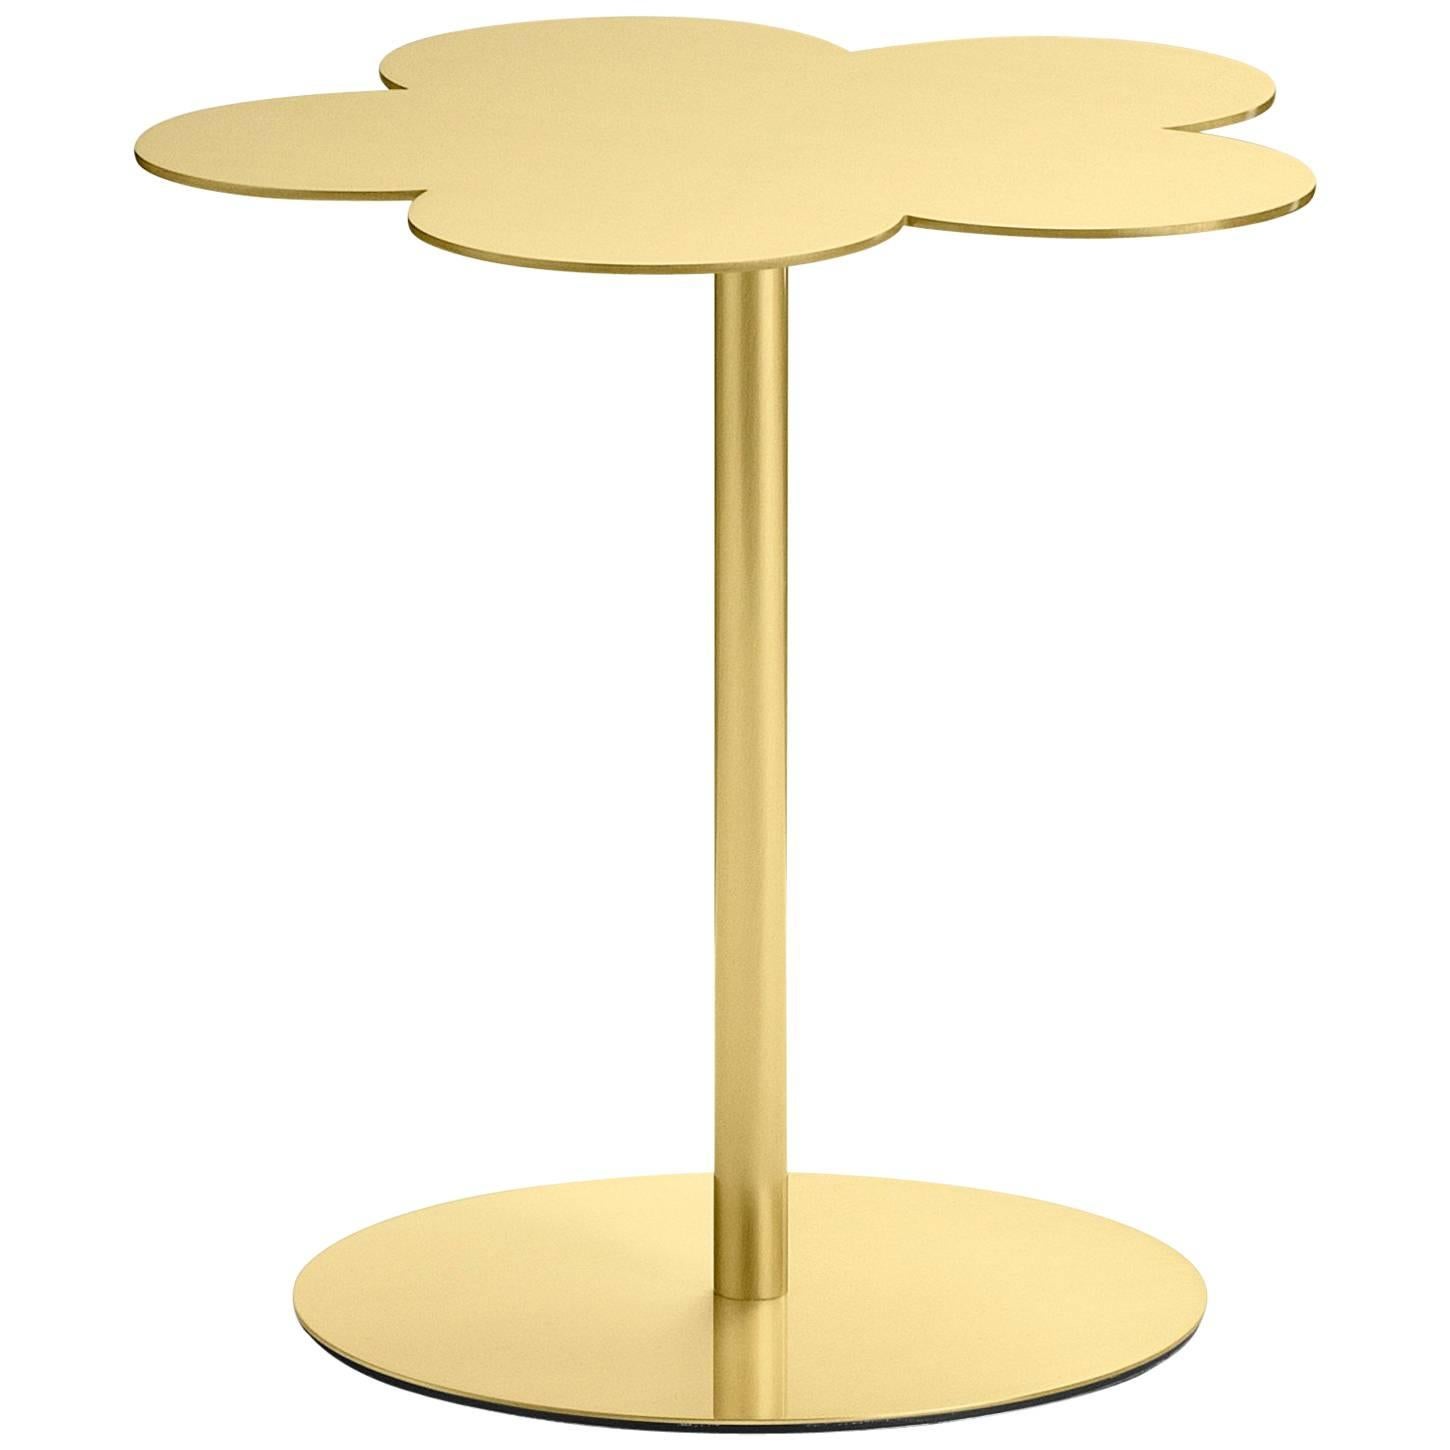 Ghidini 1961 Flowers Small Side Coffee Table in Satin Brass Finish For Sale